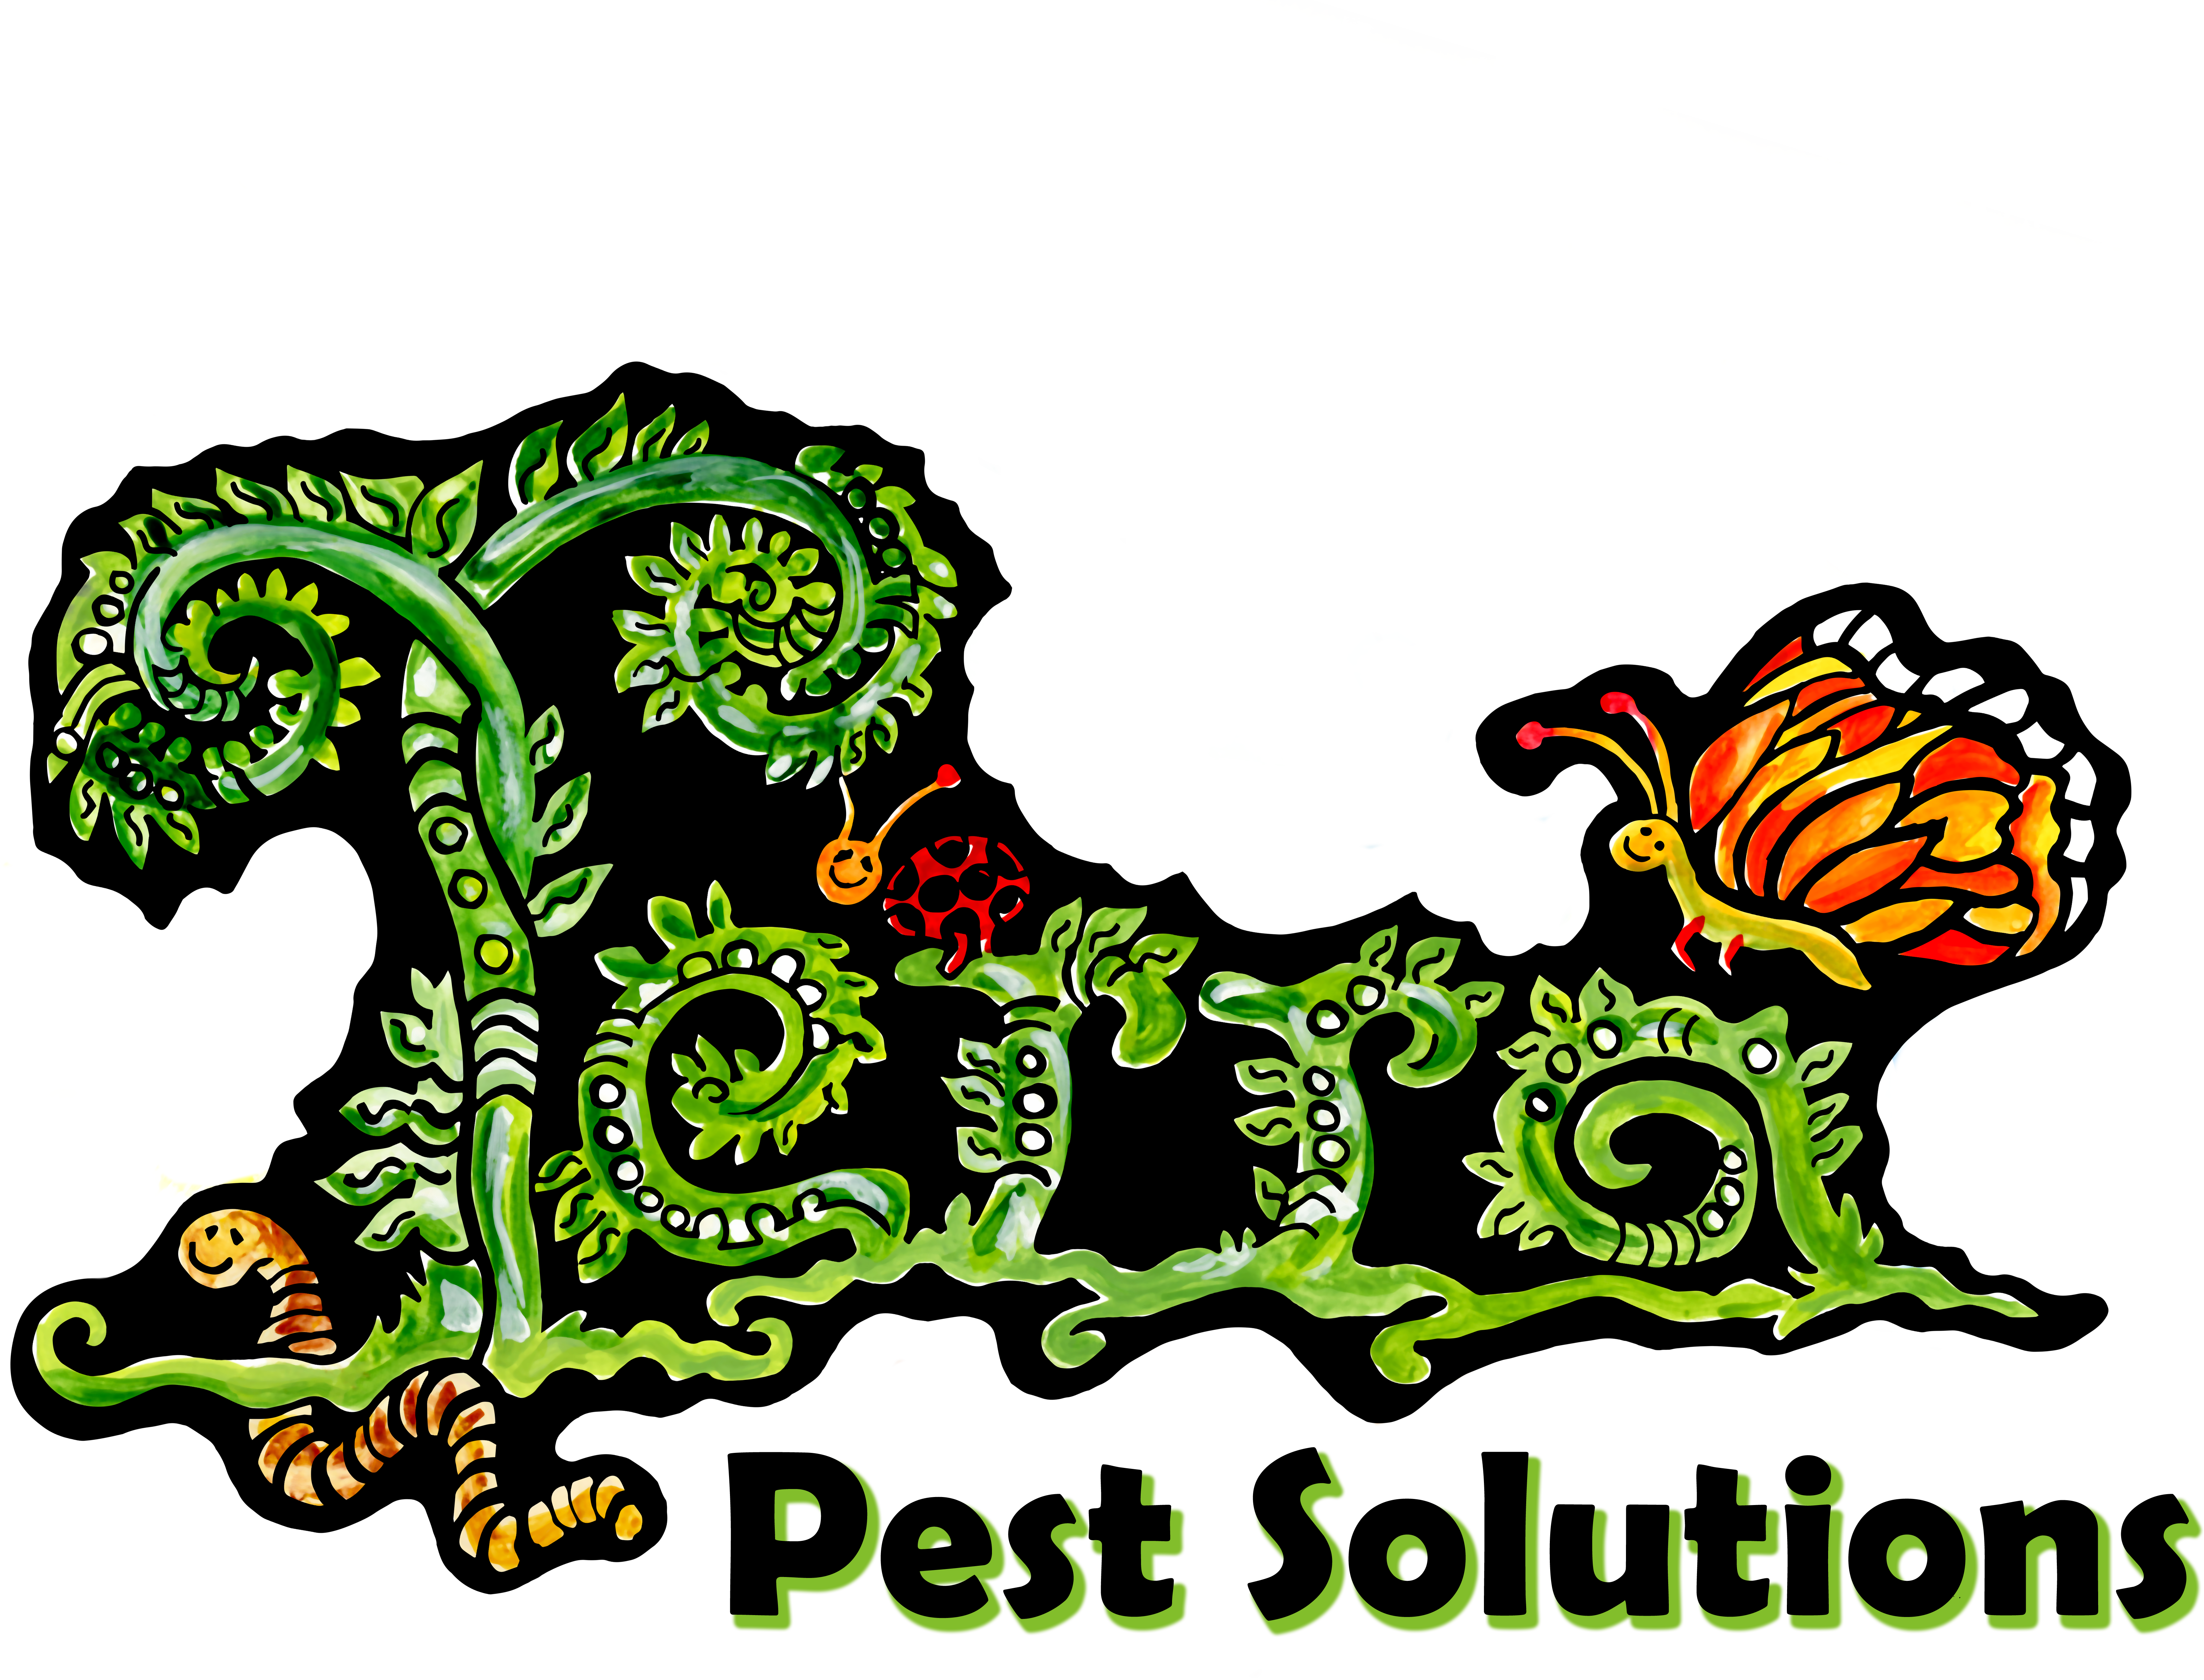 Terra Pest Solutions Now Offers Pesticide-free Pest - Asian Institute Of Technology (6890x5252)